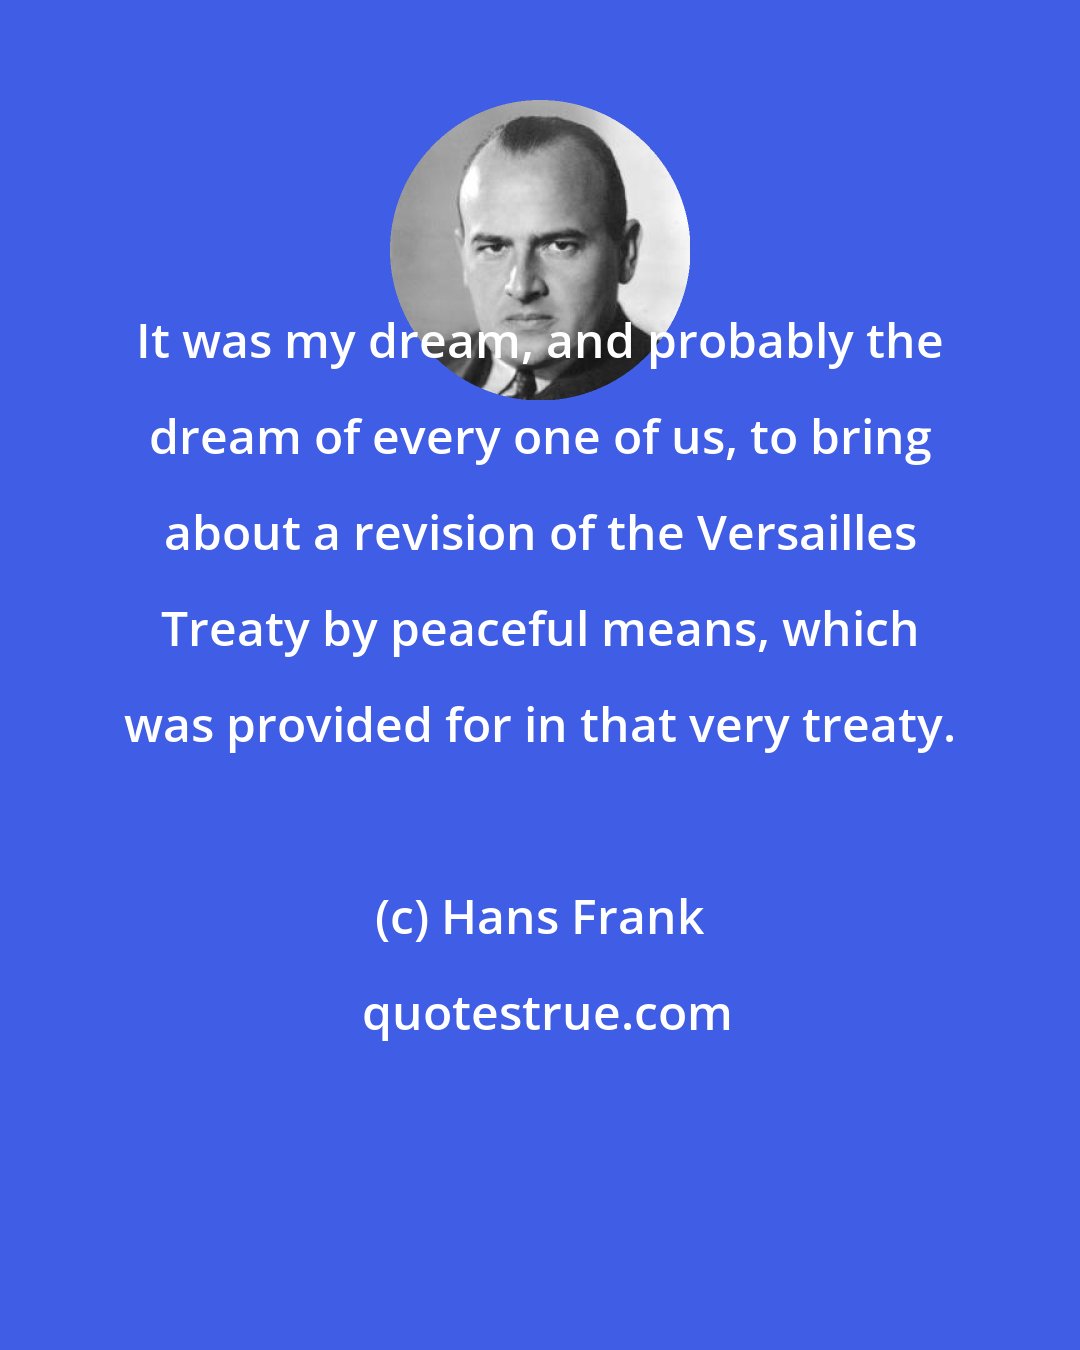 Hans Frank: It was my dream, and probably the dream of every one of us, to bring about a revision of the Versailles Treaty by peaceful means, which was provided for in that very treaty.